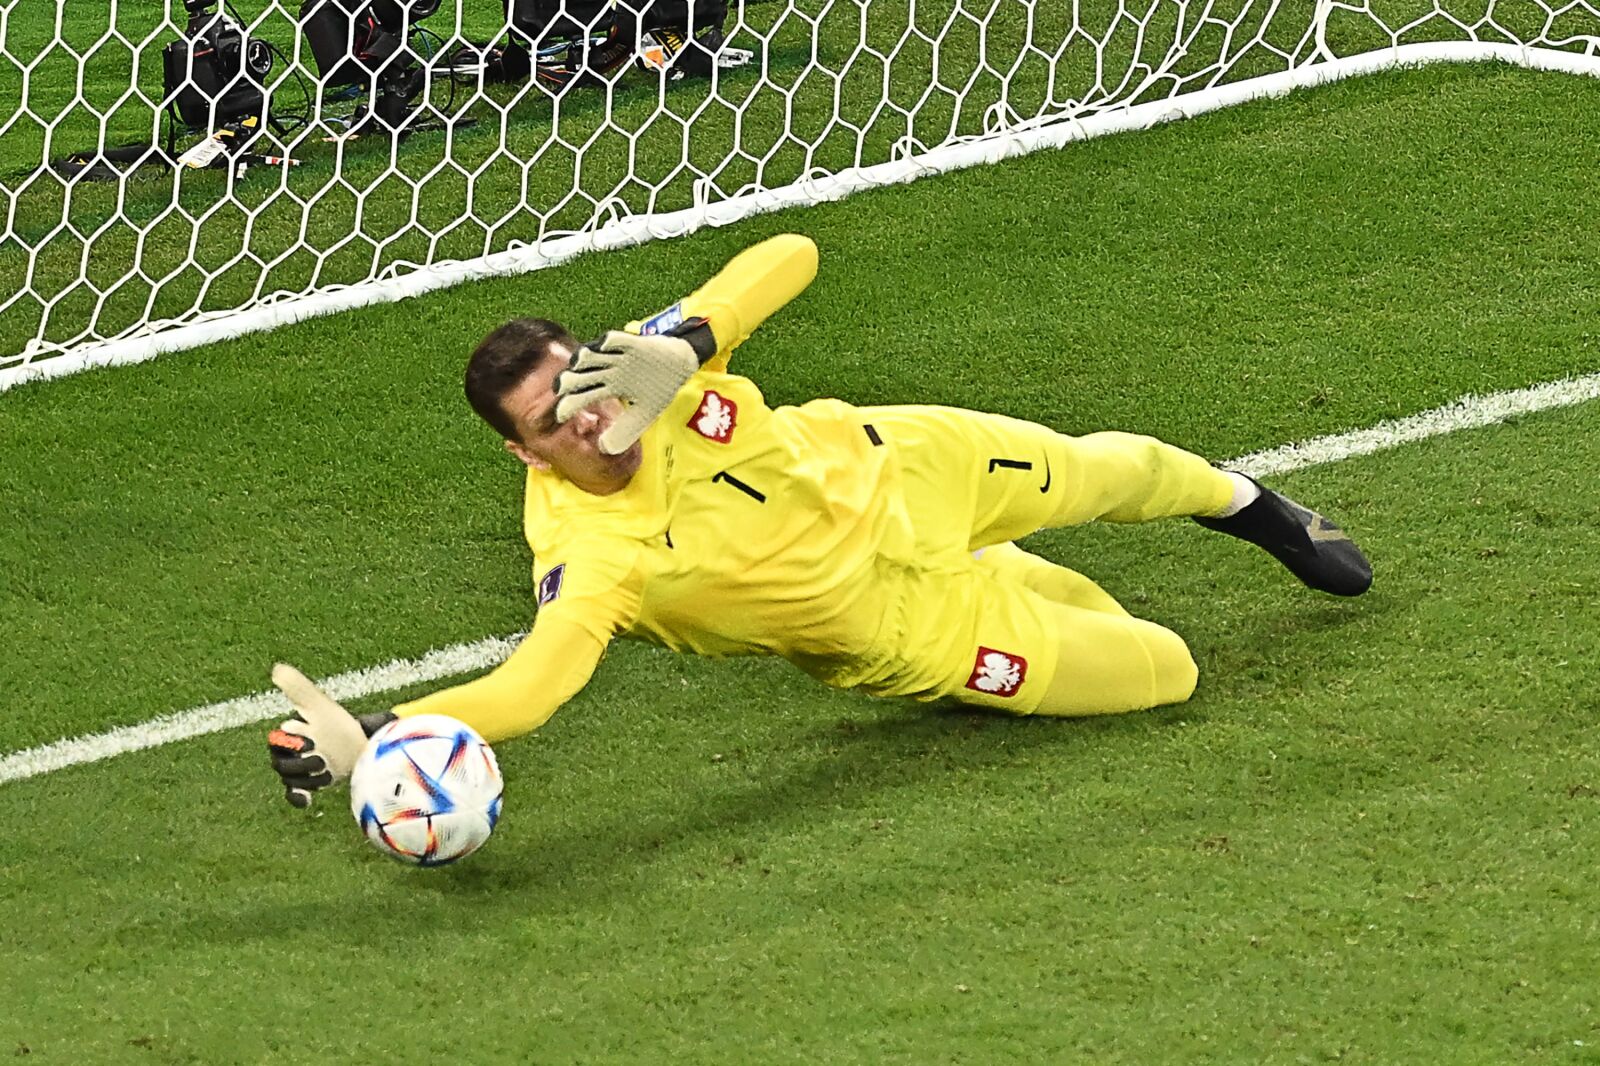 Wojciech Szczesny finally conceded against Argentina, but he shined again, denying Lionel Messi from the penalty spot. He hadn't been beaten in 680 minutes.